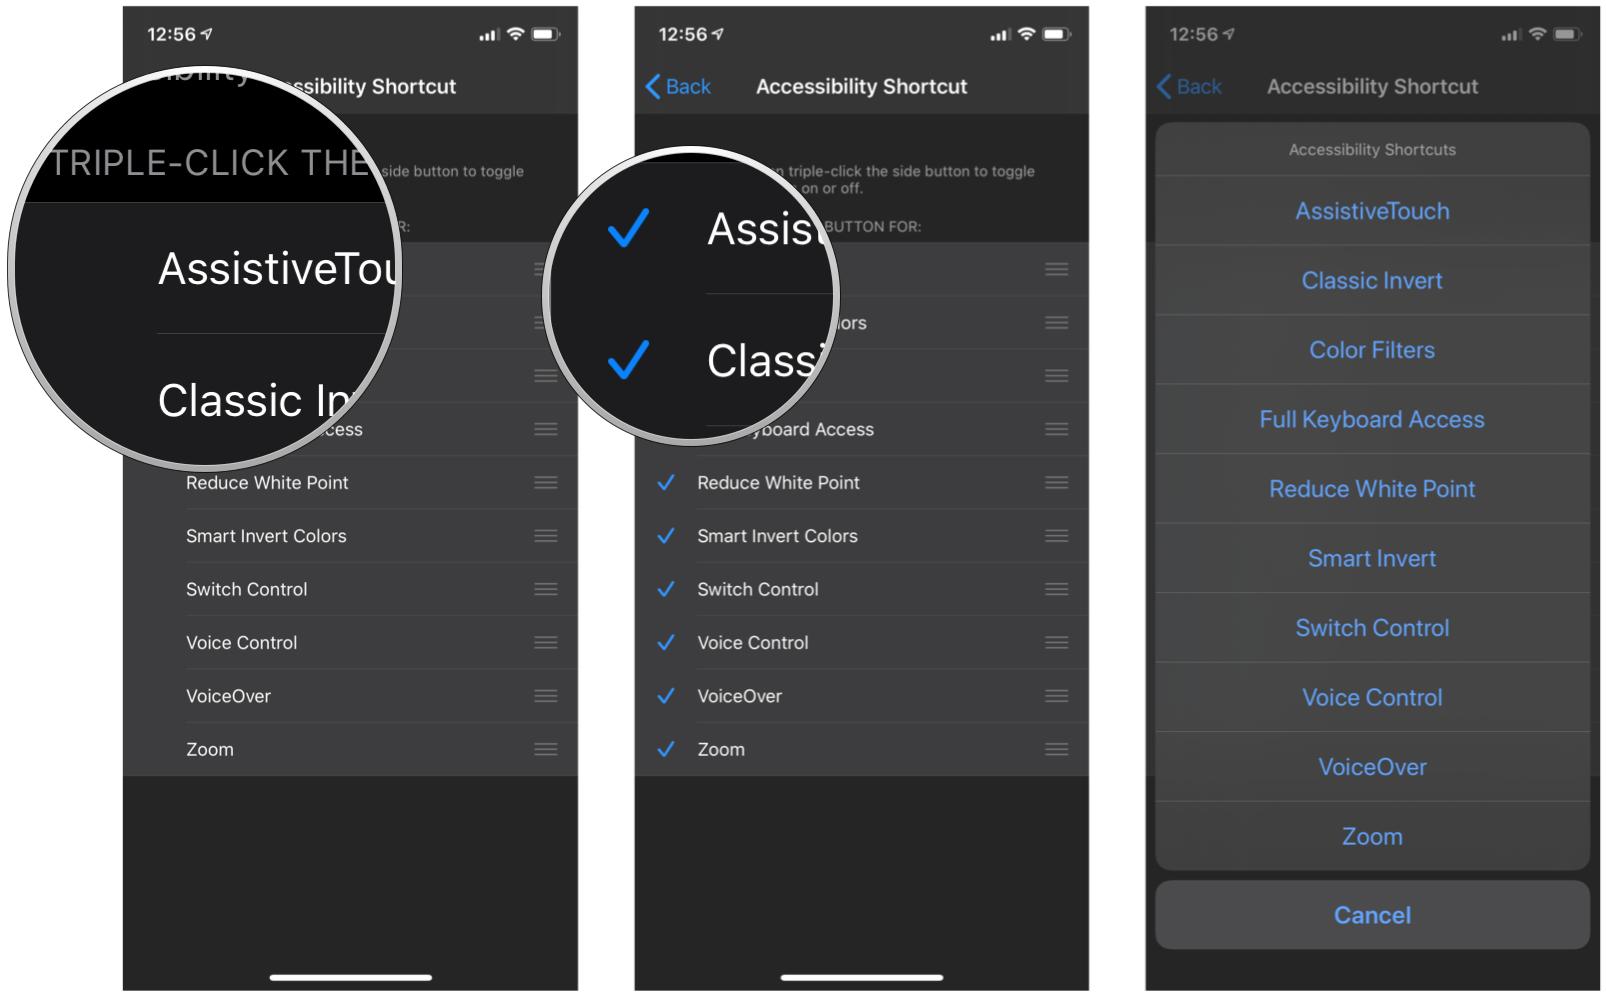 How to use and customize the Accessibility Shortcut on iPhone and iPad by showing steps choose the action you want the shortcut to perform. If there are multiple options, choose what to do from menu